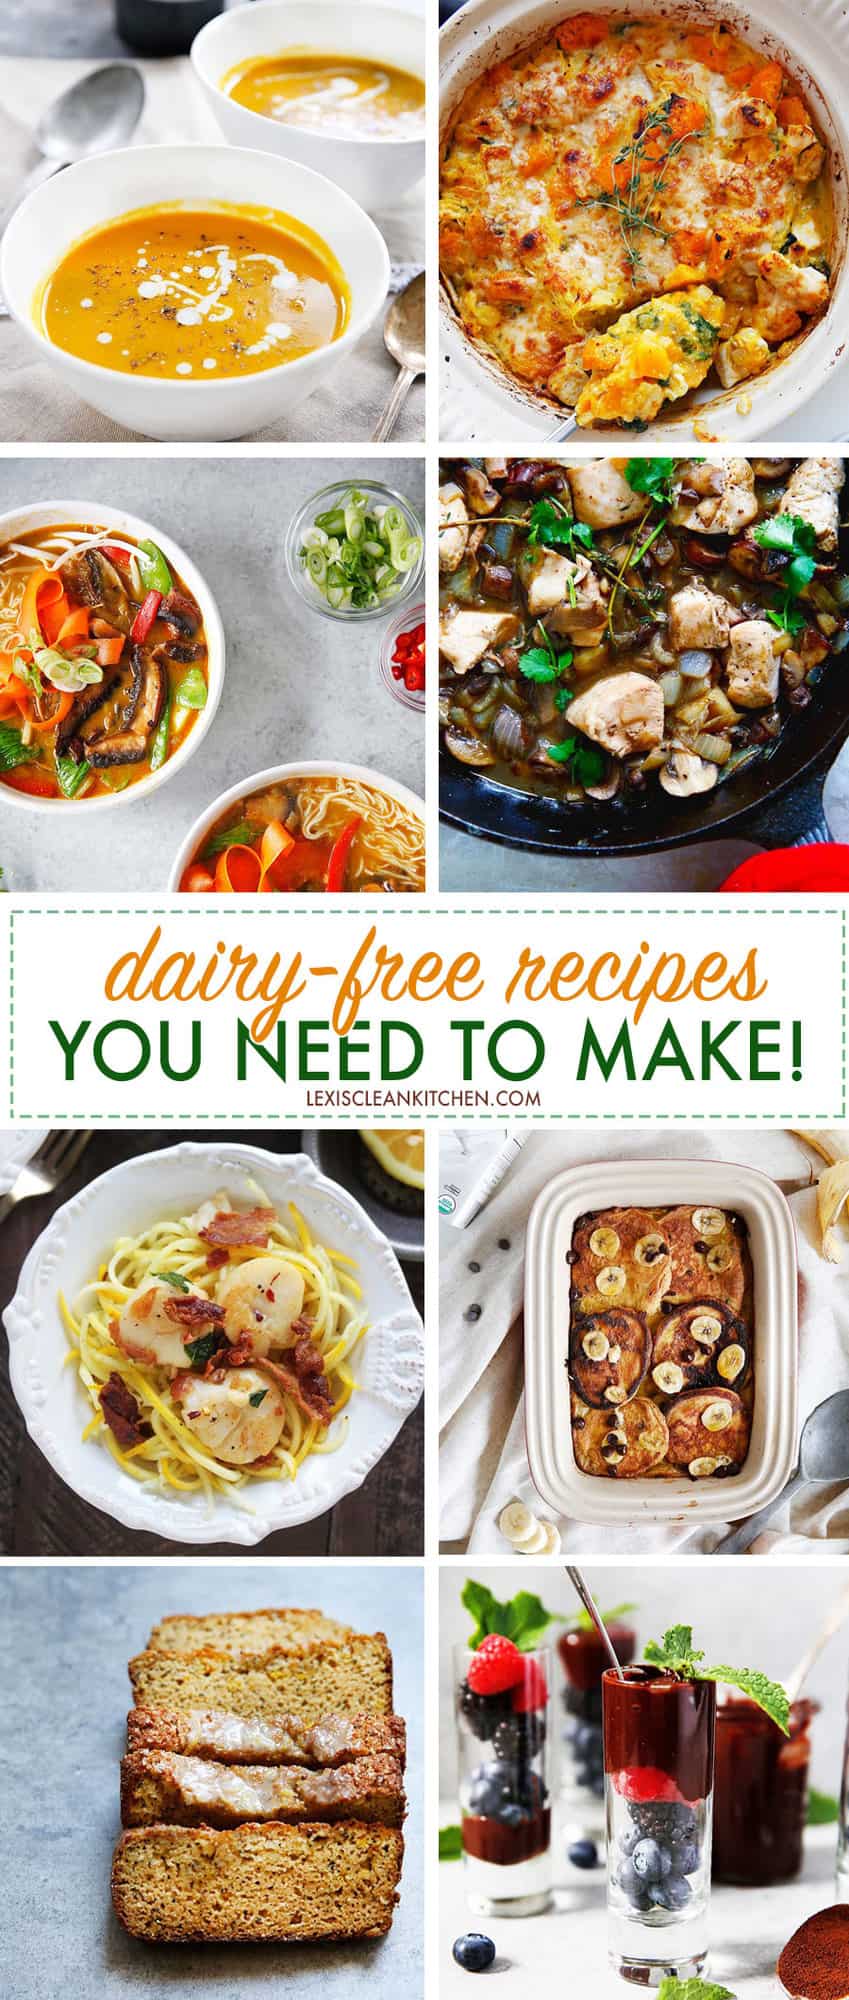 dairy-free recipes you need to make!